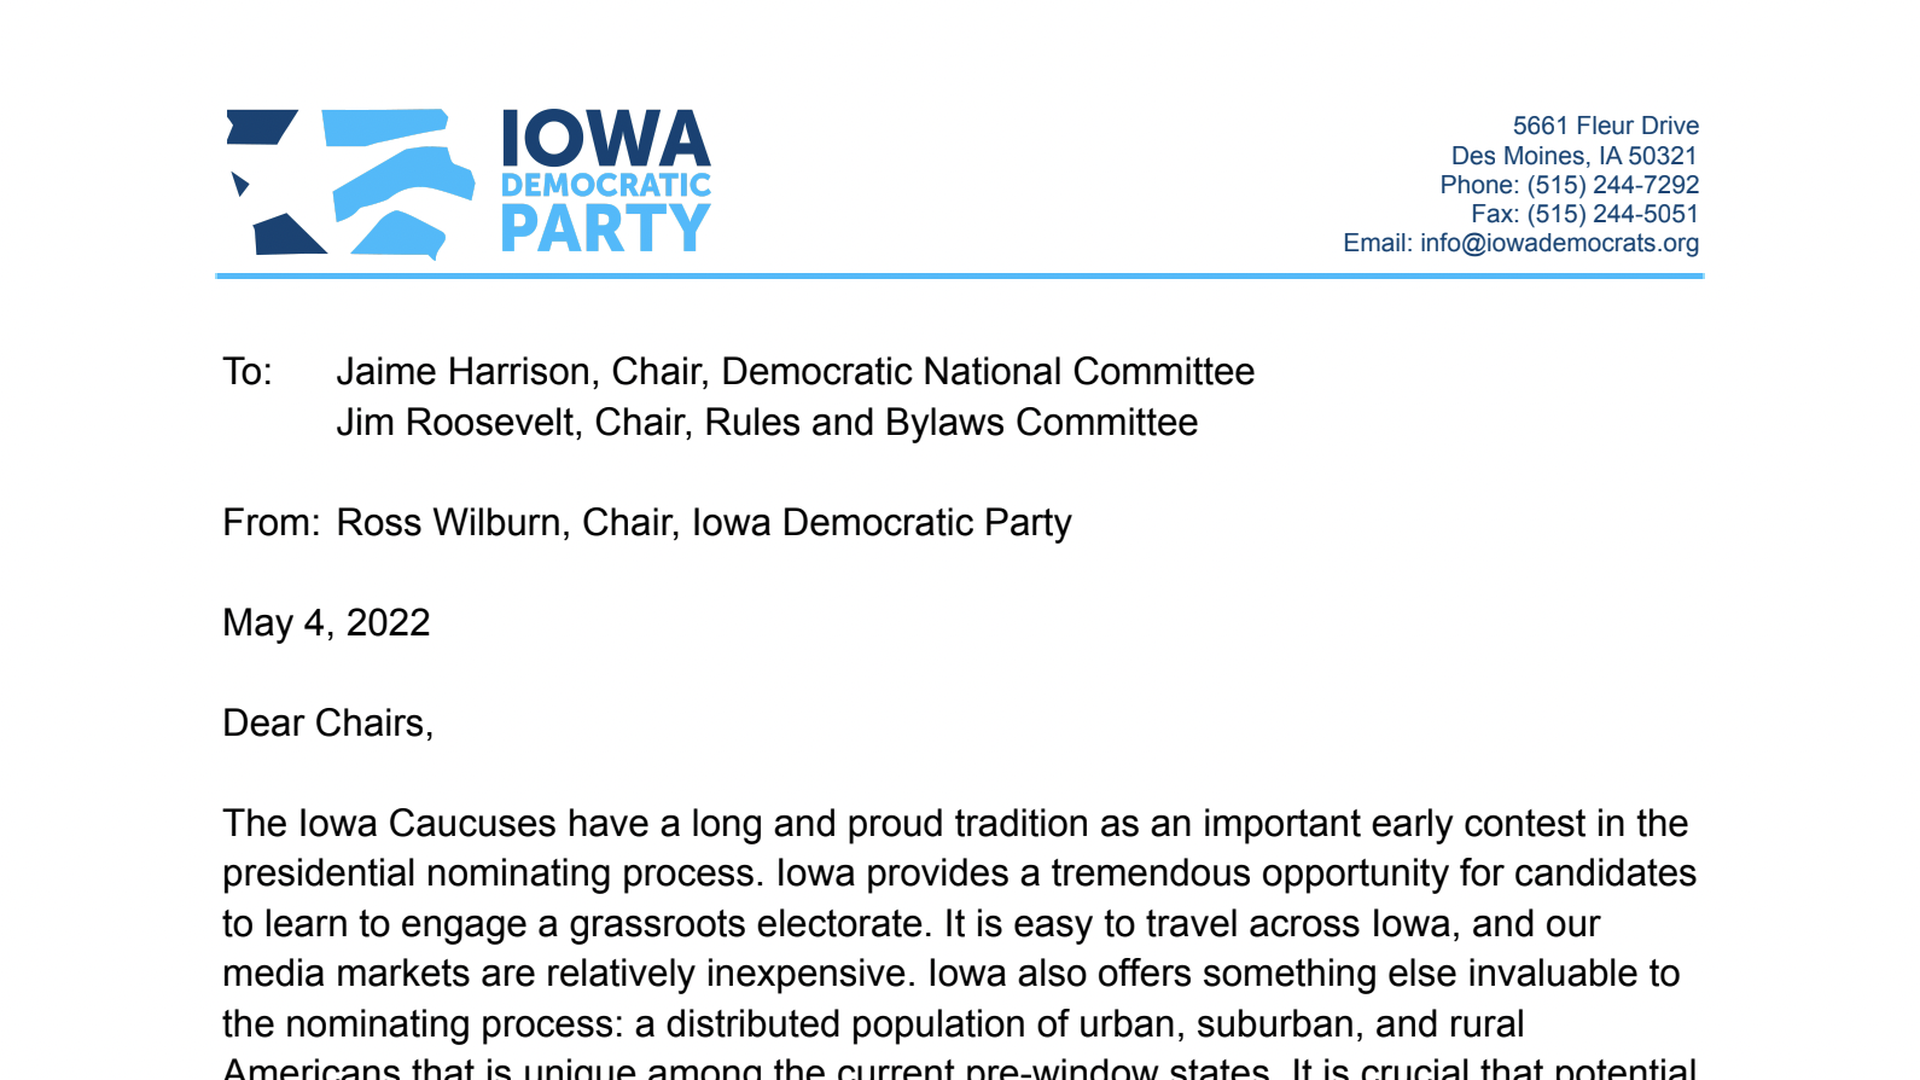 Iowa Democratic Party letter to the DNC for caucuses